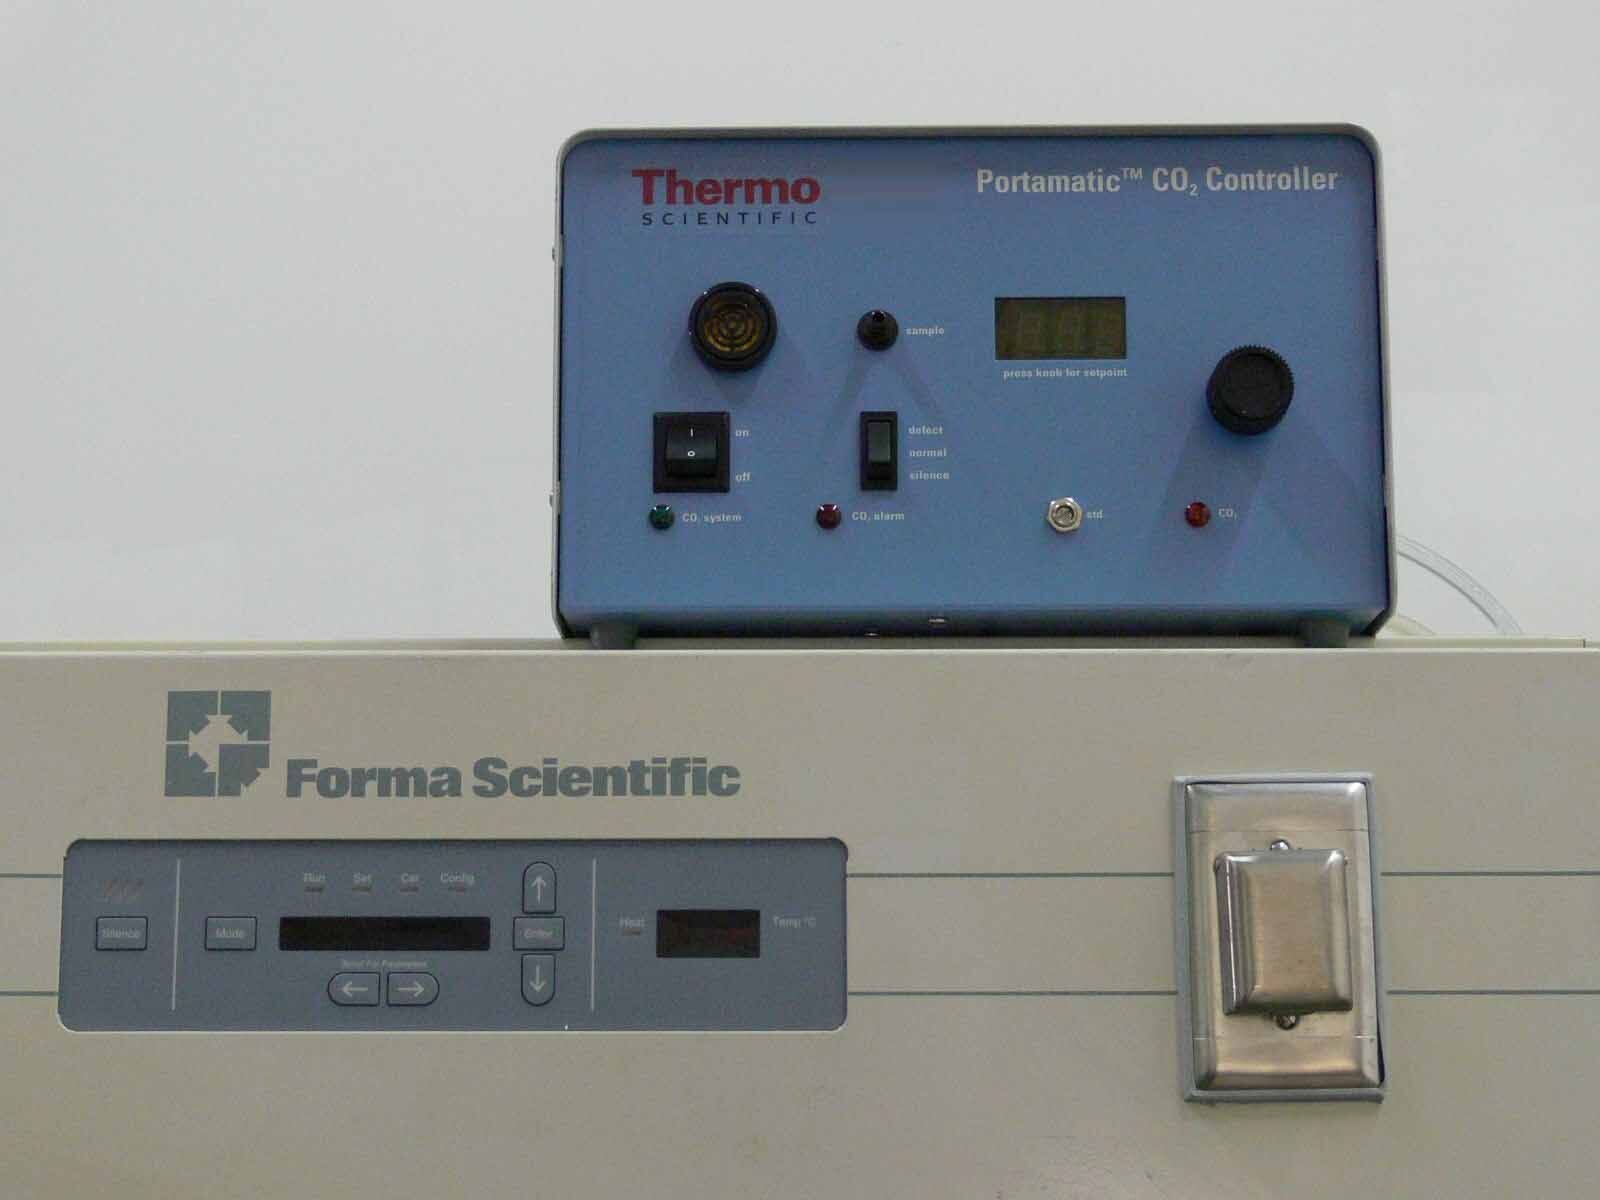 Photo Used THERMO FORMA 3960 For Sale